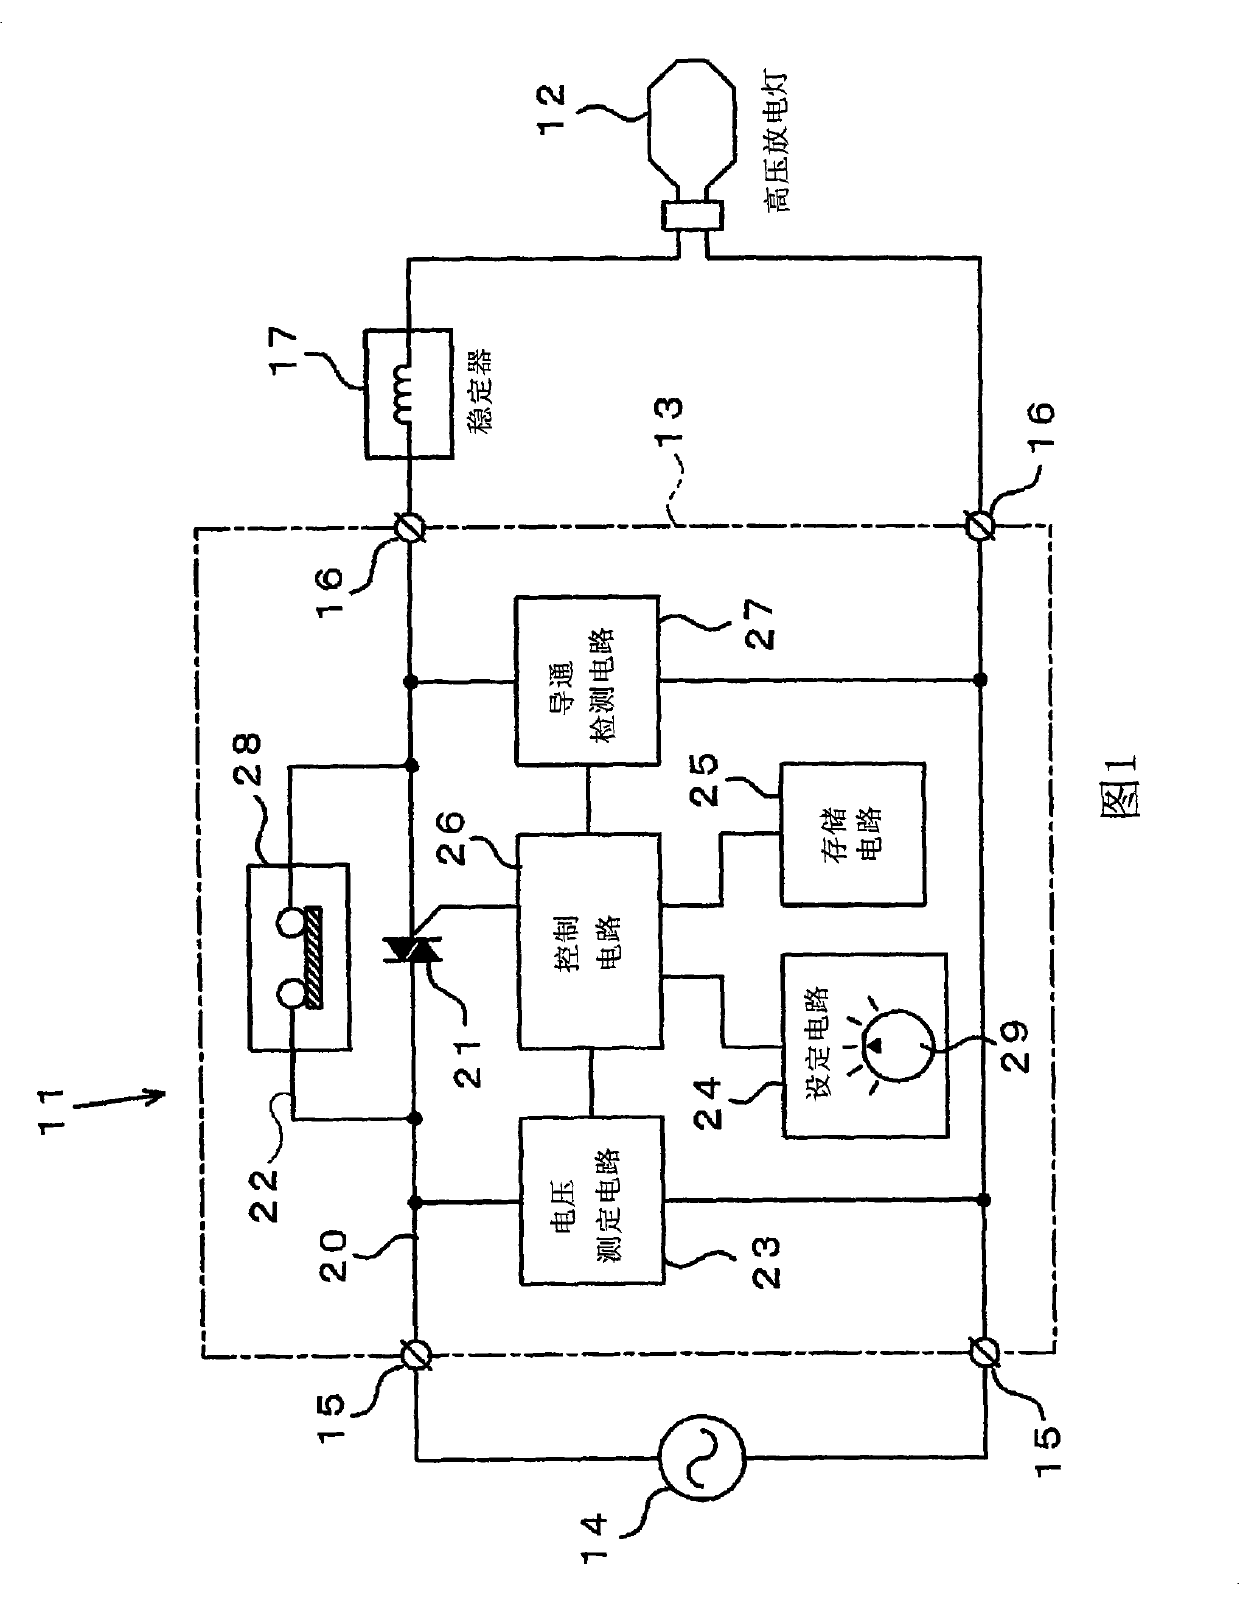 Power saving apparatus for a high-intensity discharge lamp